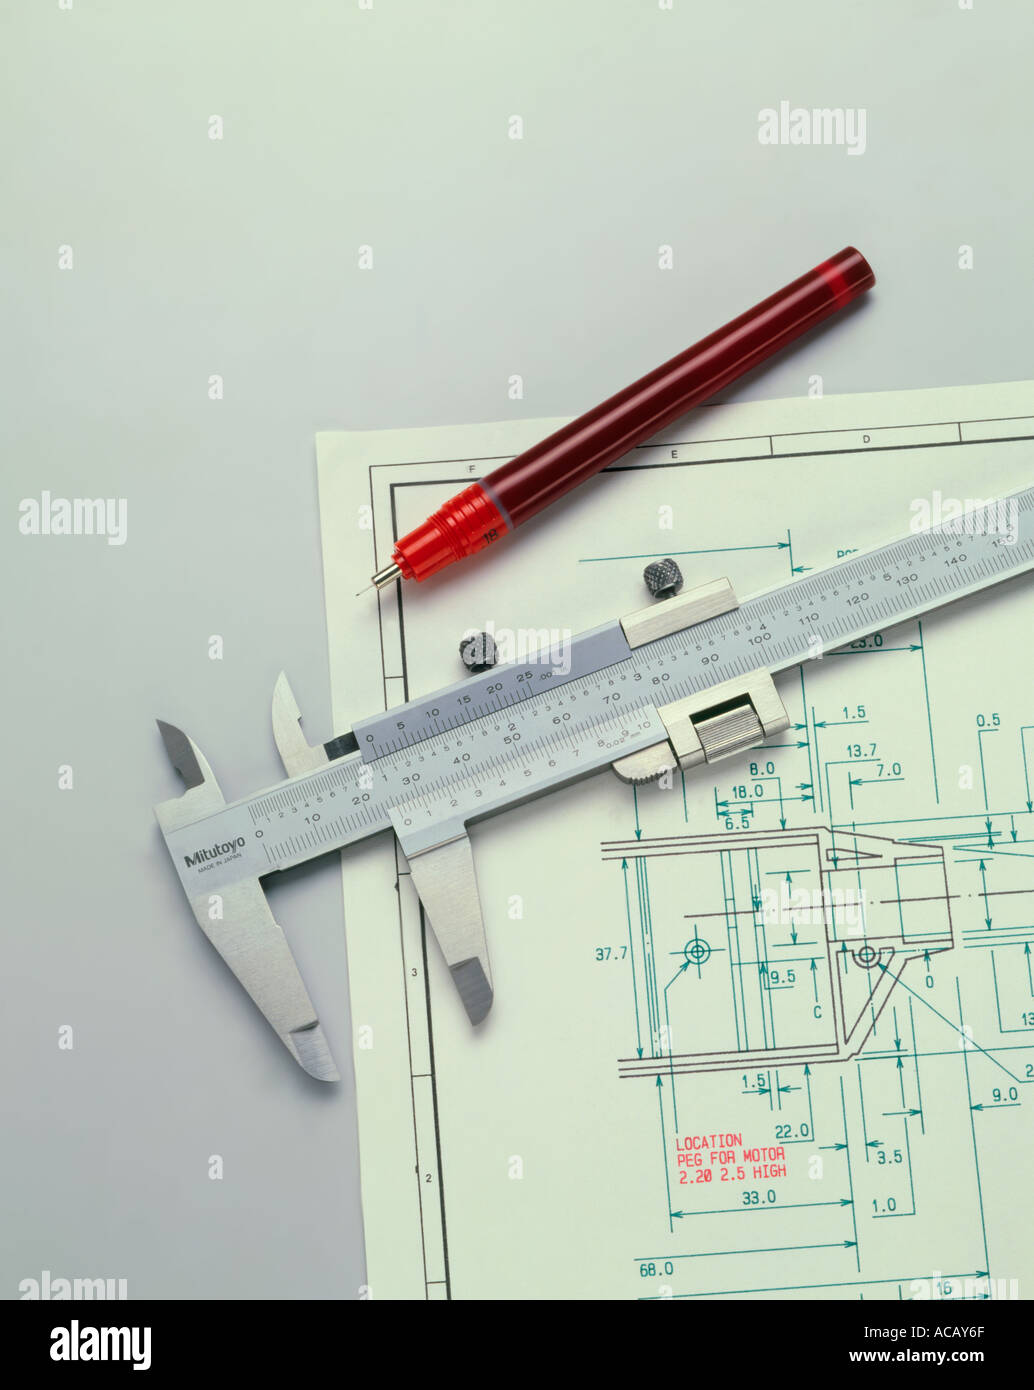 Rotring Technical Drawing Template Bathroom Installation Art 853796 1:20 